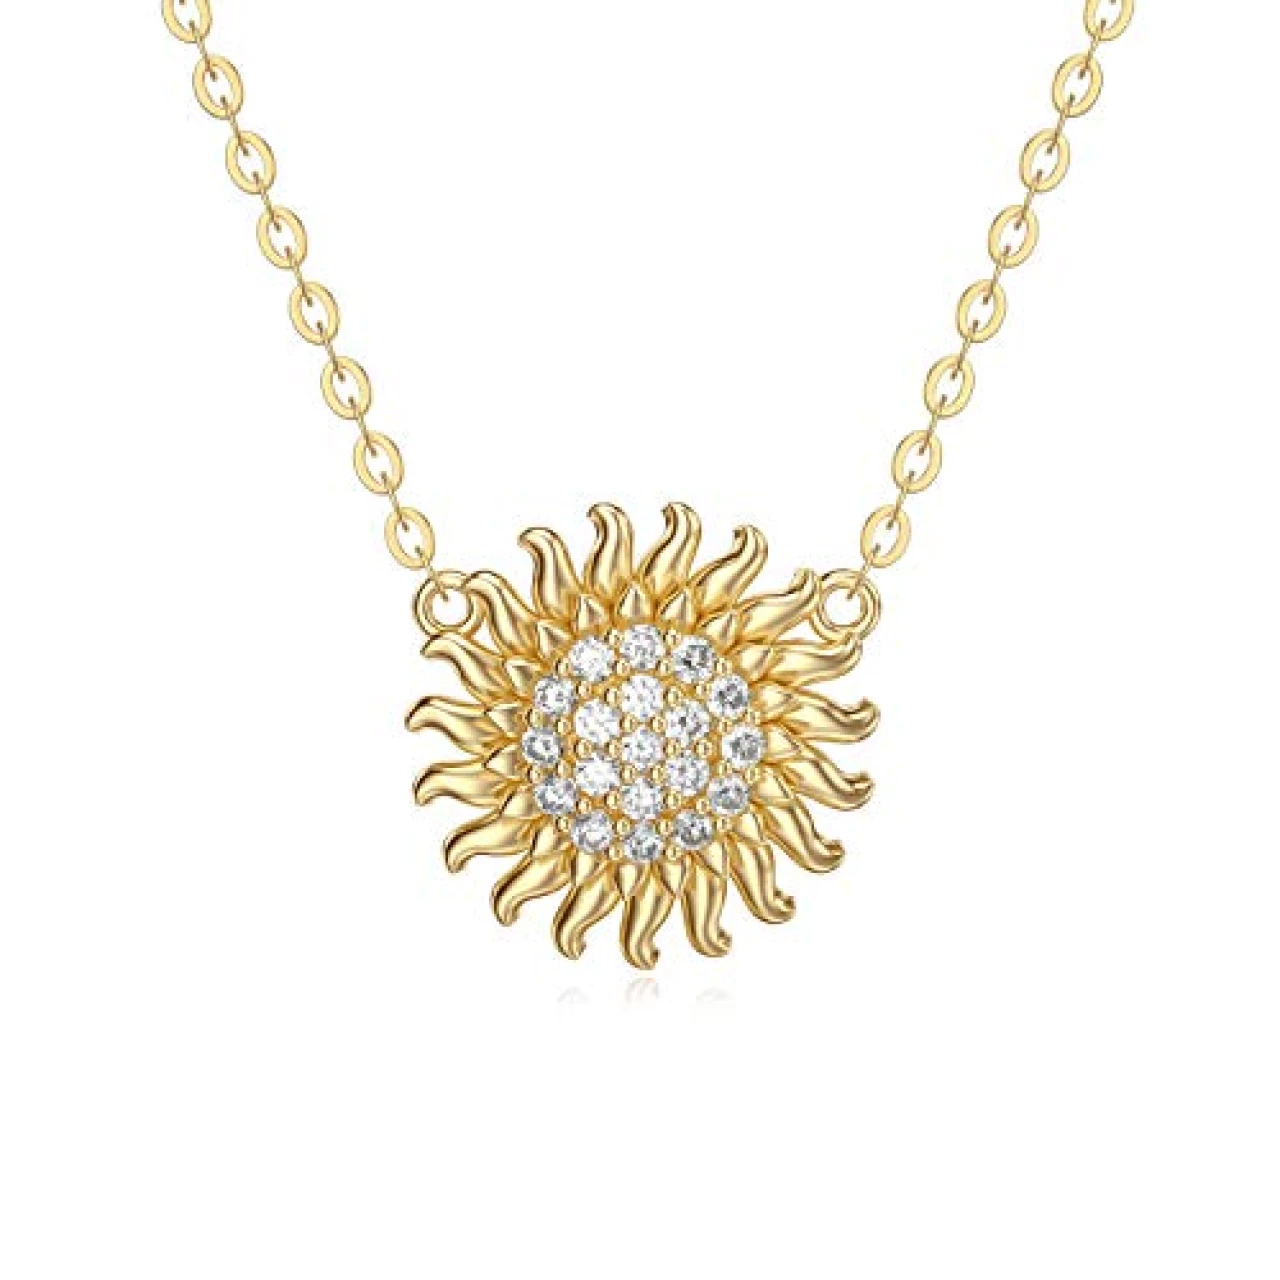 MOTIEL Sunflower Necklace 14K Yellow Gold Flower Pendant Necklace Moissanite Jewelry Flame Necklace